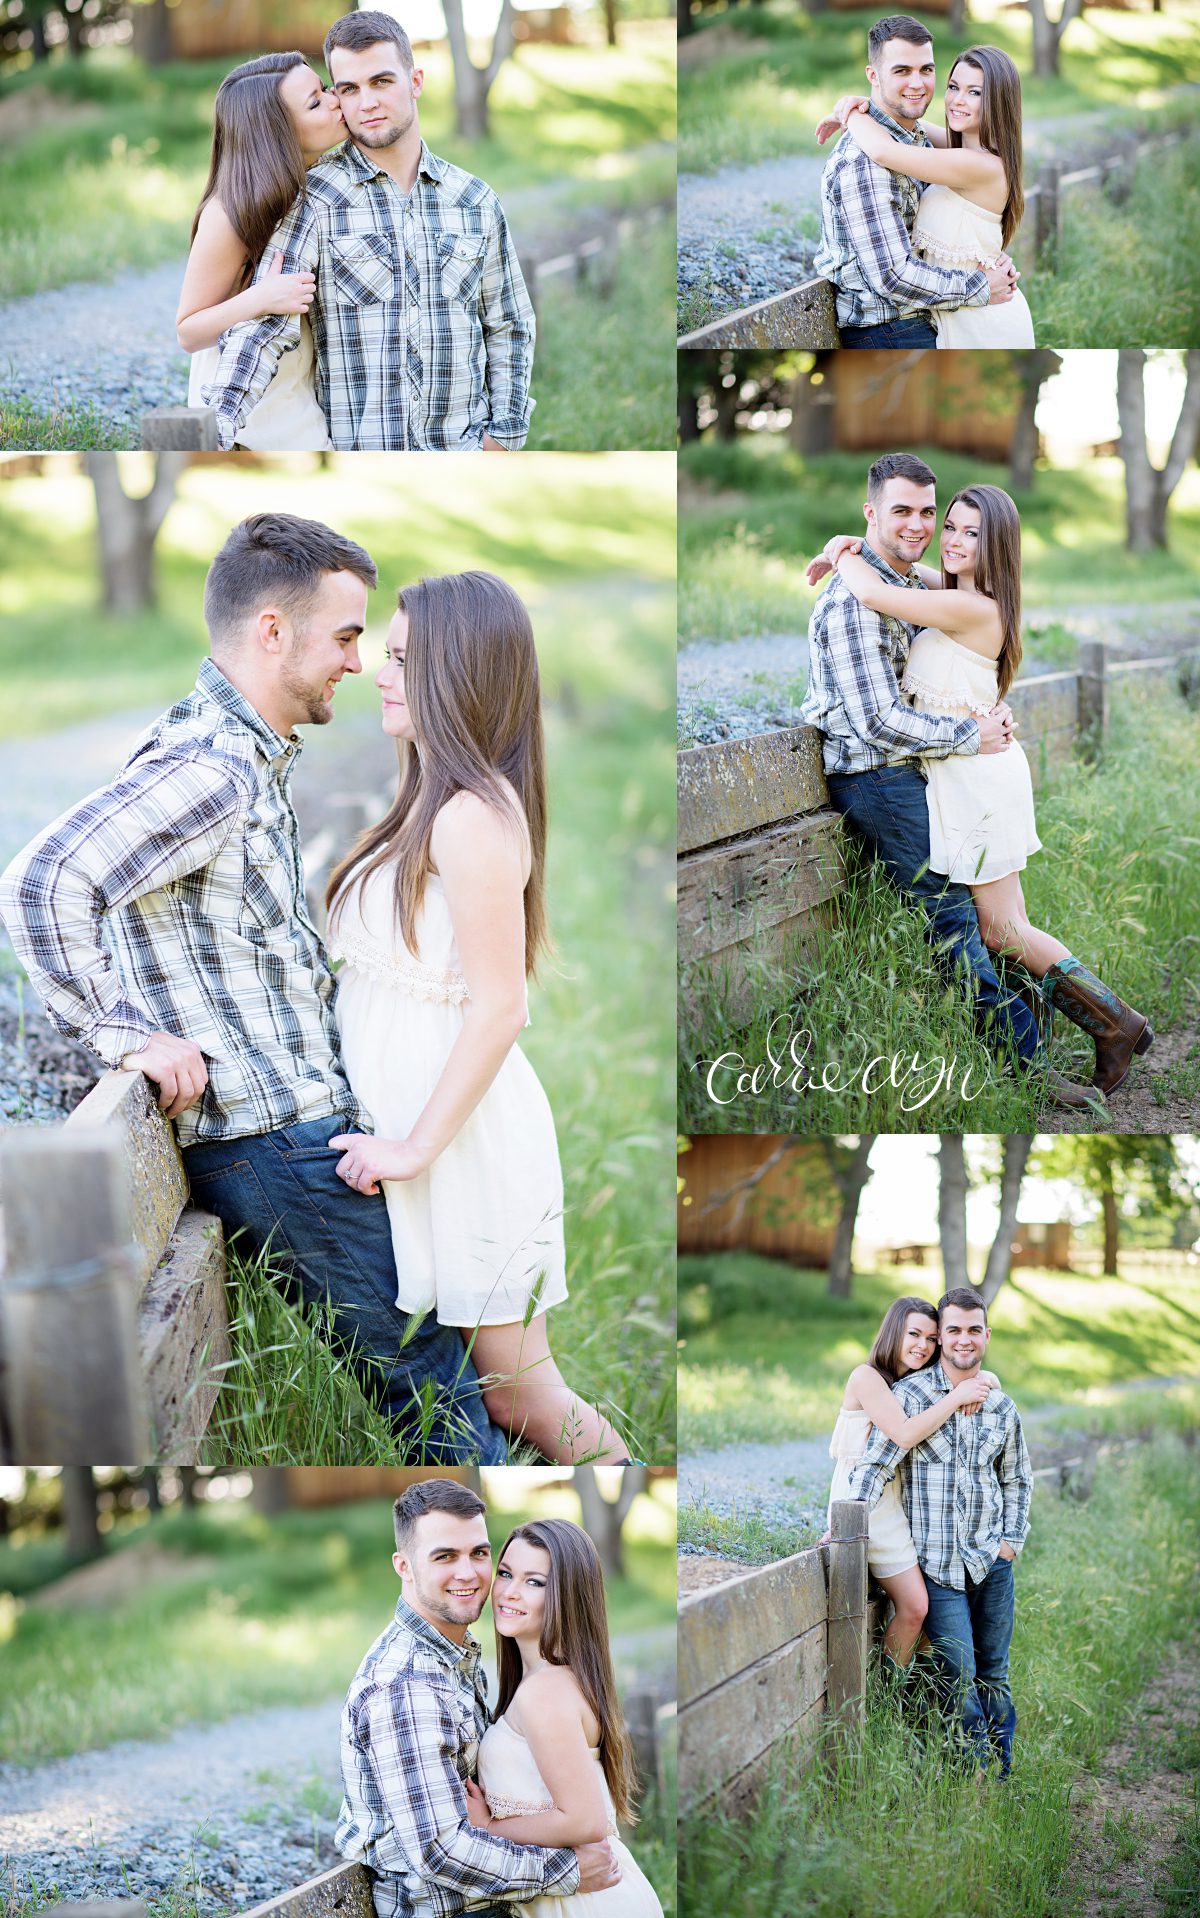 Carrie Ayn; Cameron Park Engagement Photographer; El Dorado Hills Engagement Photographer